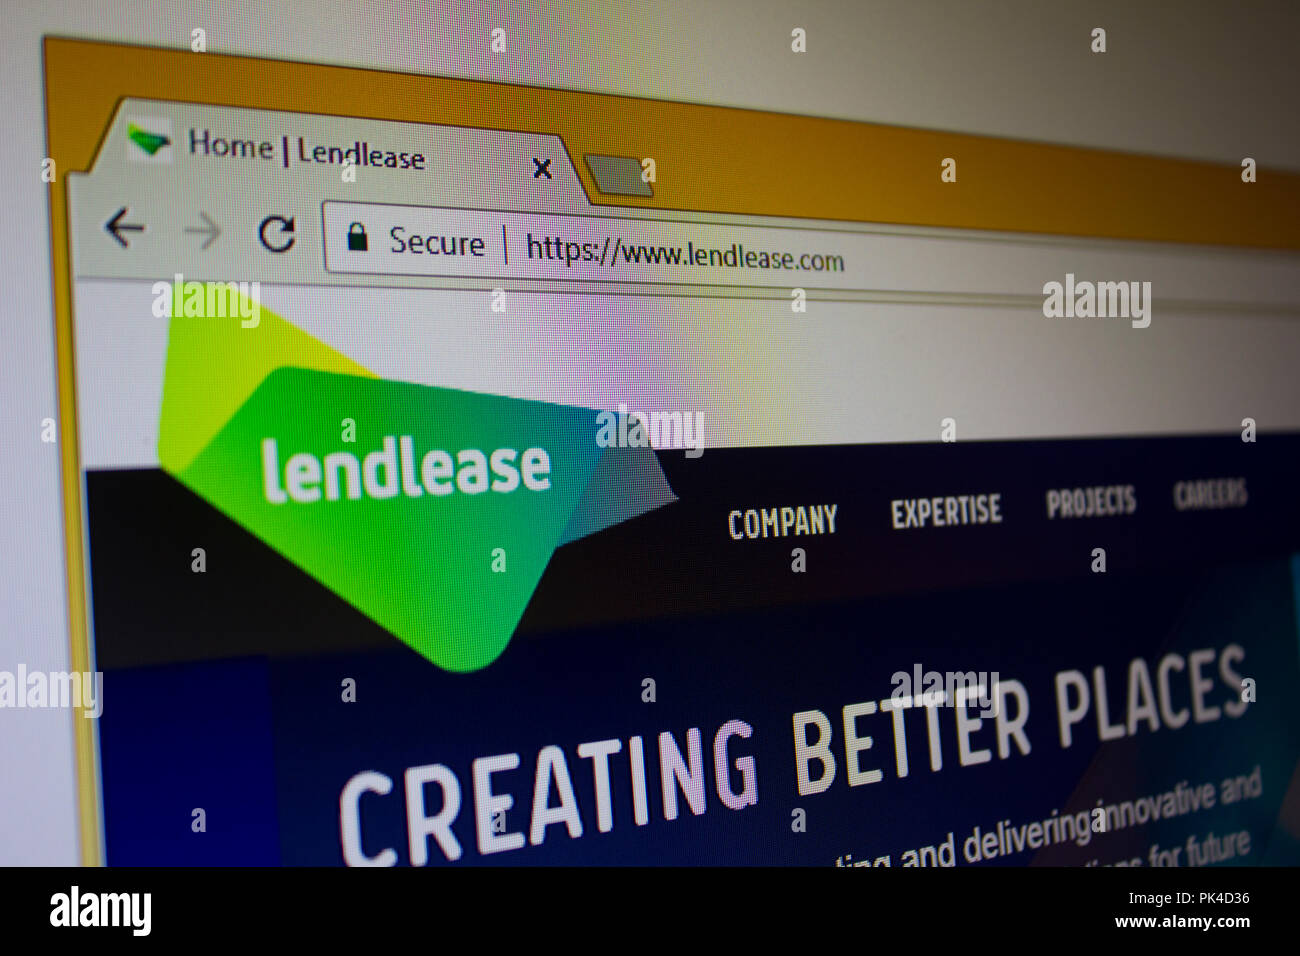 Lendlease Group Website Homepage Stock Photo